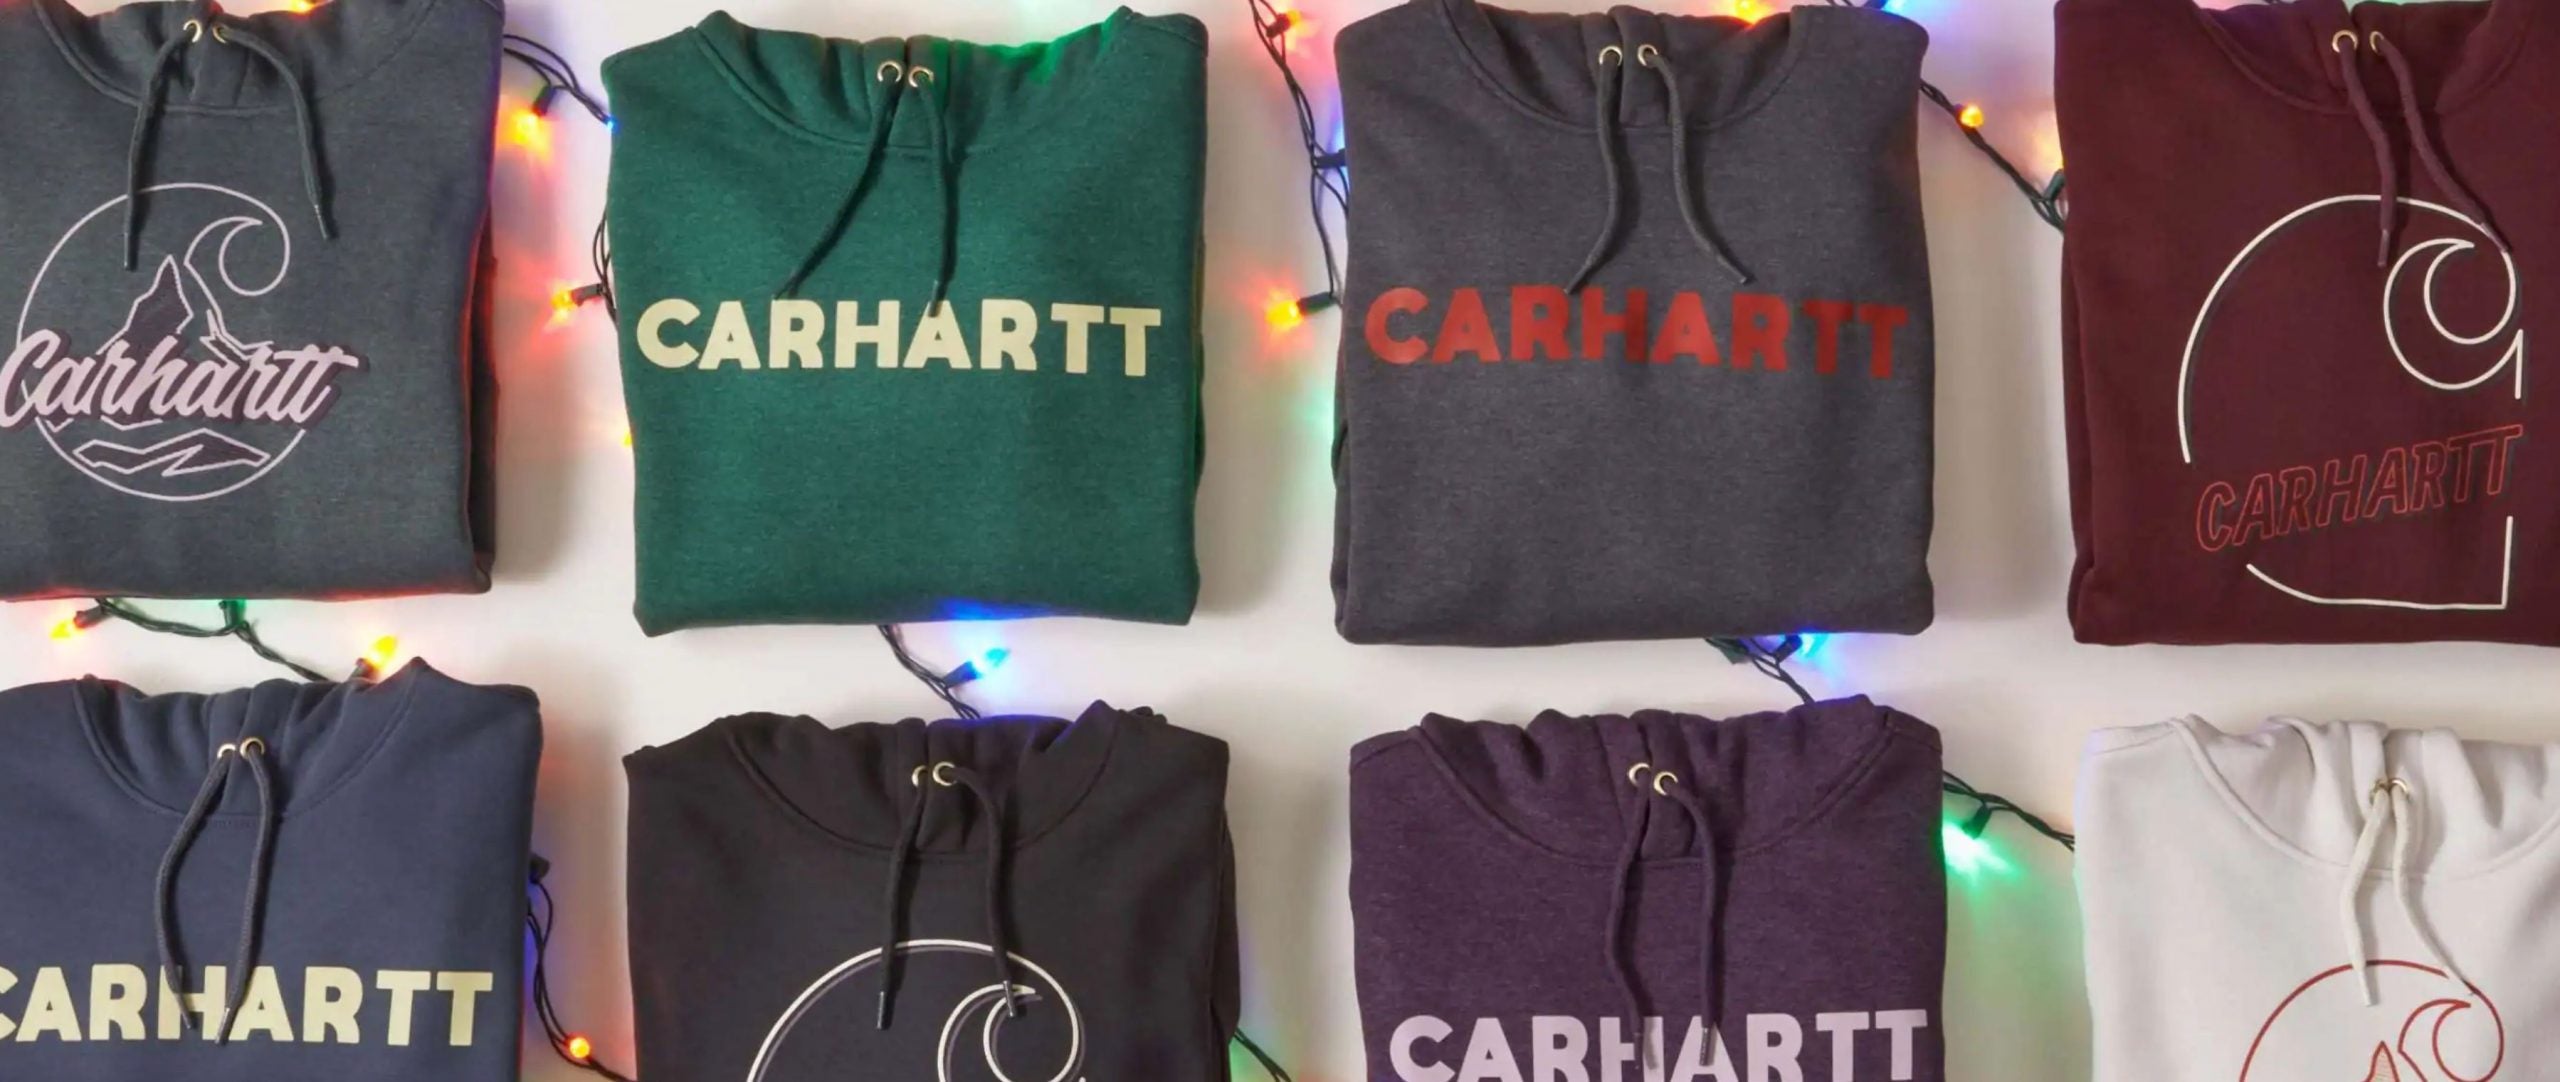 Carhartt Black Friday deals get an early start for 2021 AGDAILY